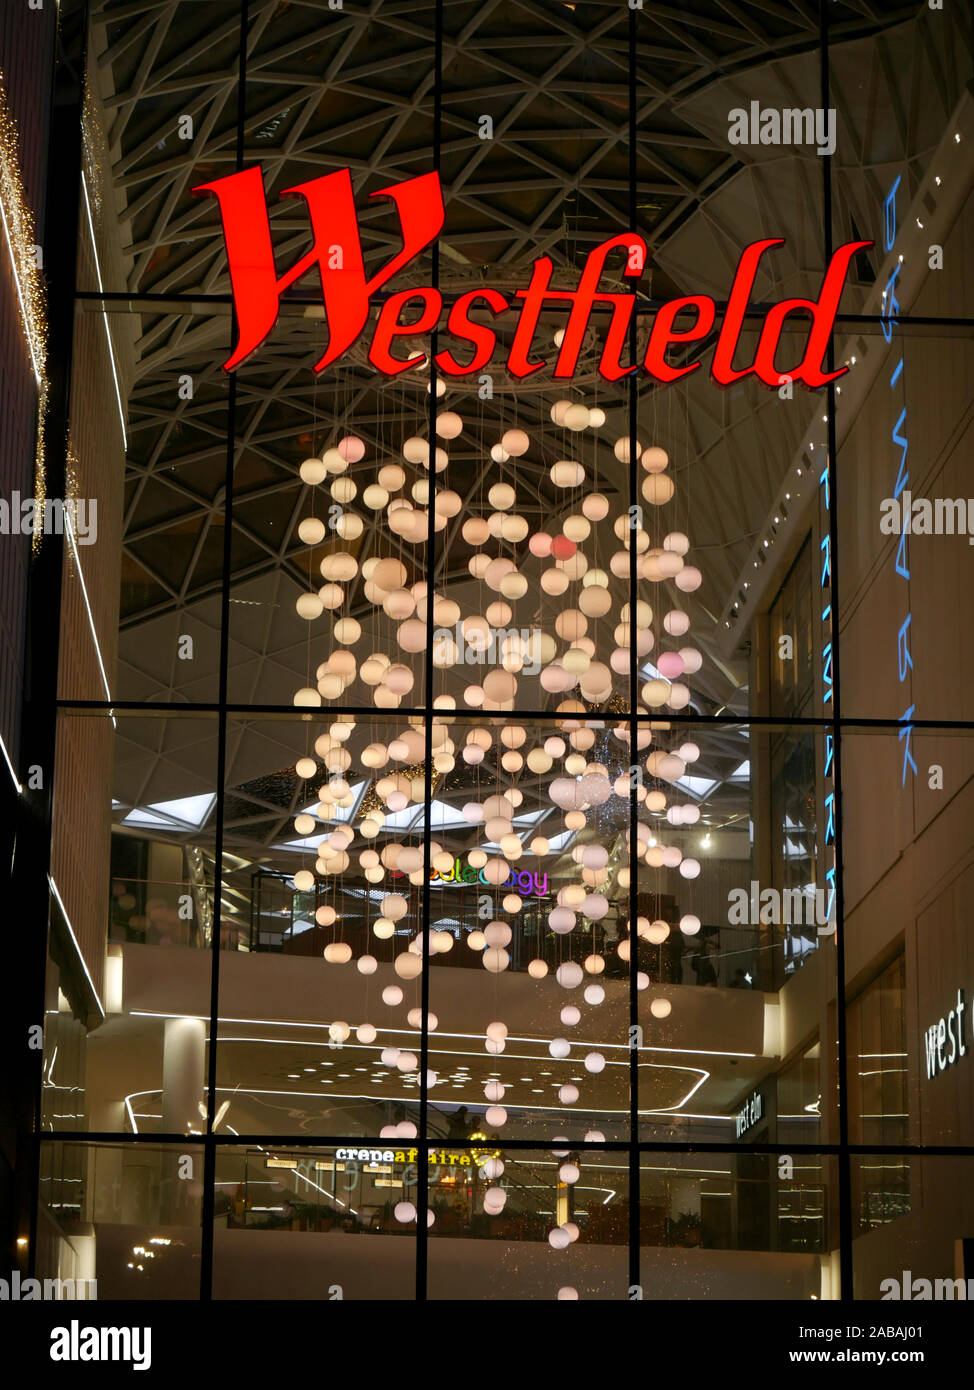 One of the entrances to Westfield Shopping Centre, White City, London, UK at Christmas Stock Photo